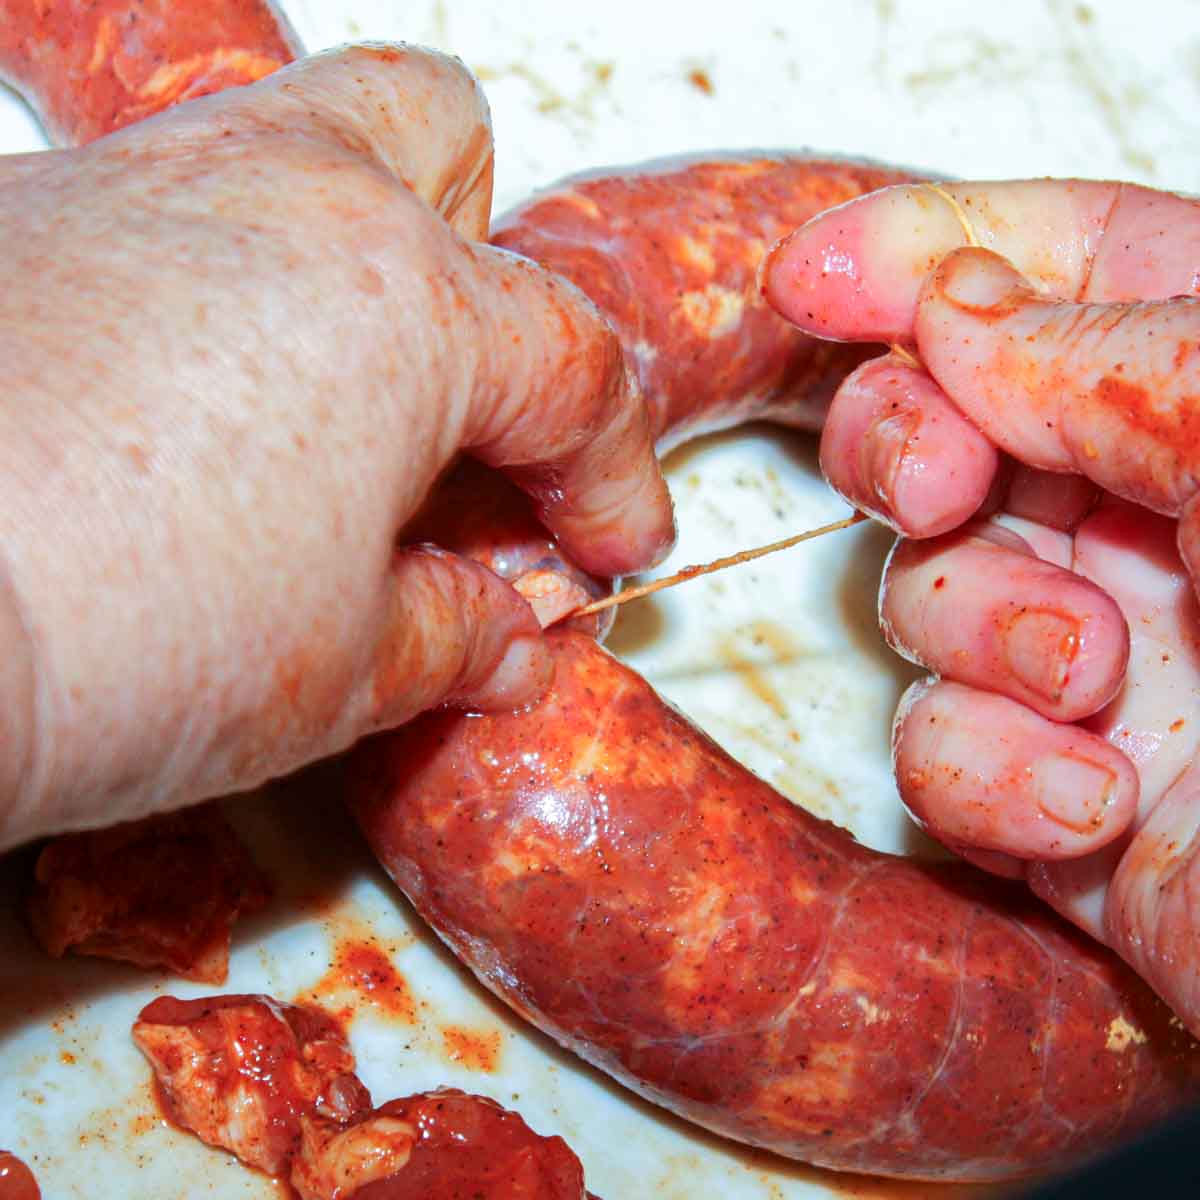 A person is putting a Portuguese sausage into a ring.